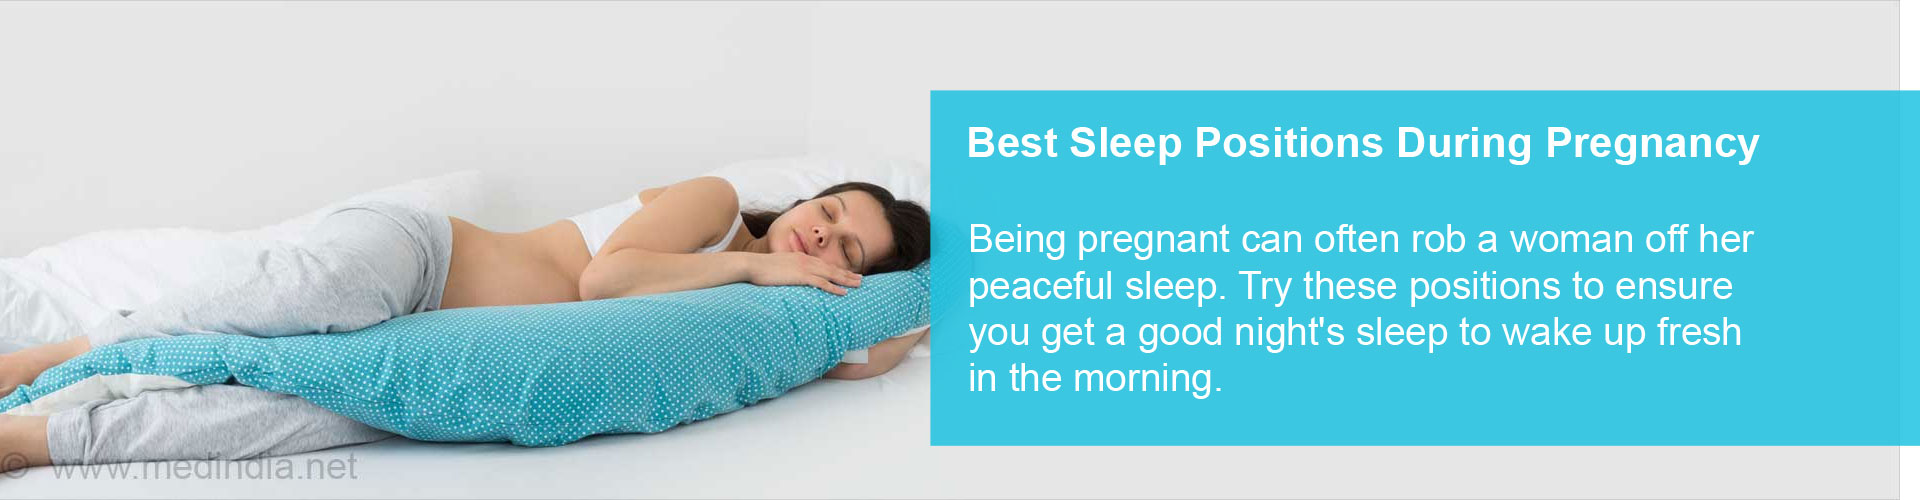 Best Sleep Positions During Pregnancy